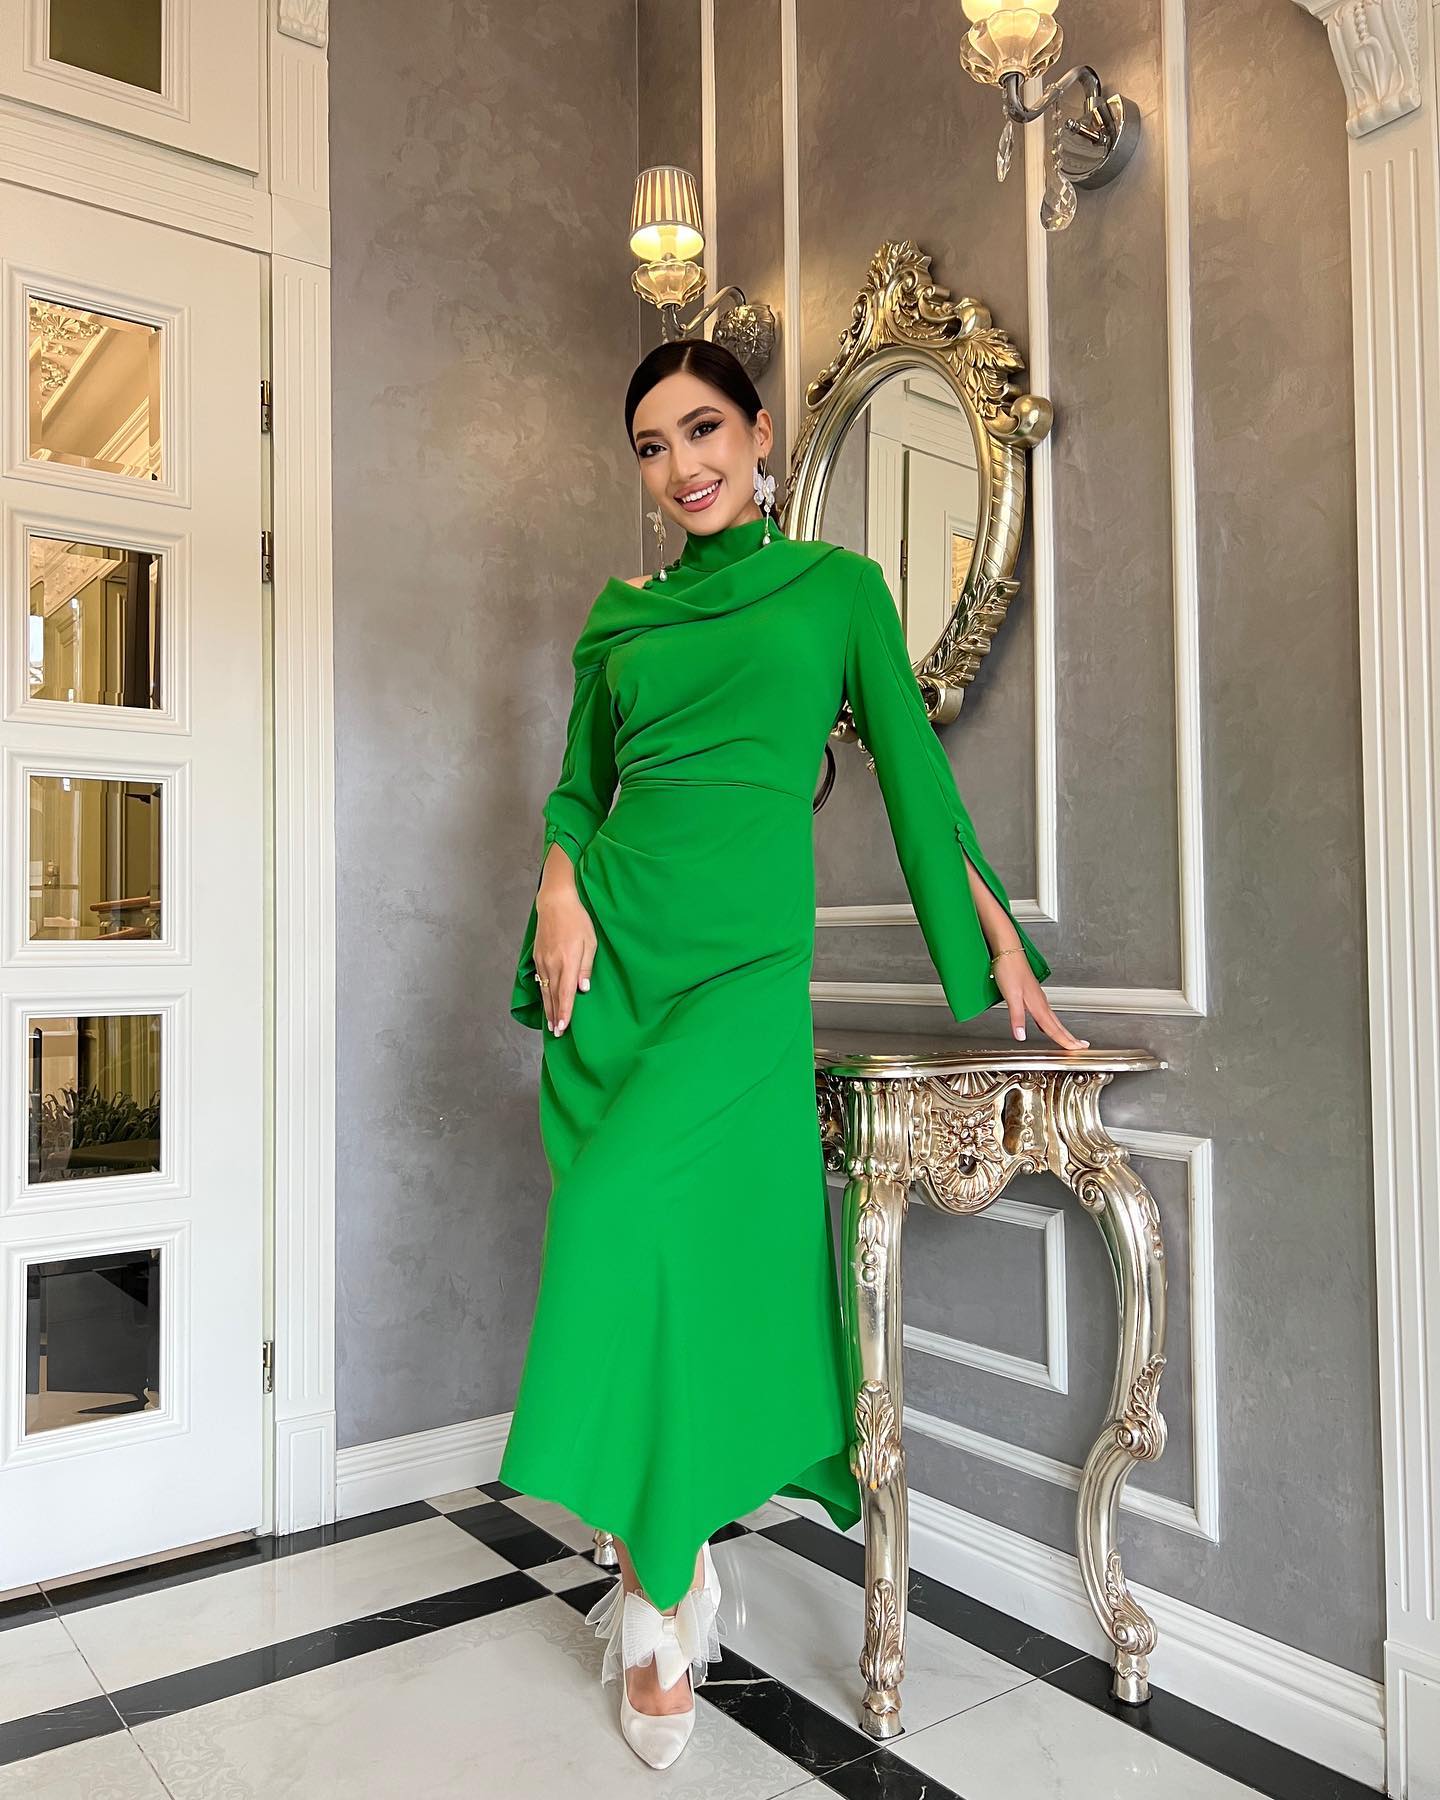 Classy Green Evening Dresses High Neck Crepe Full Sleeves A Line Ankle Length Custom Made for Women Formal Gowns